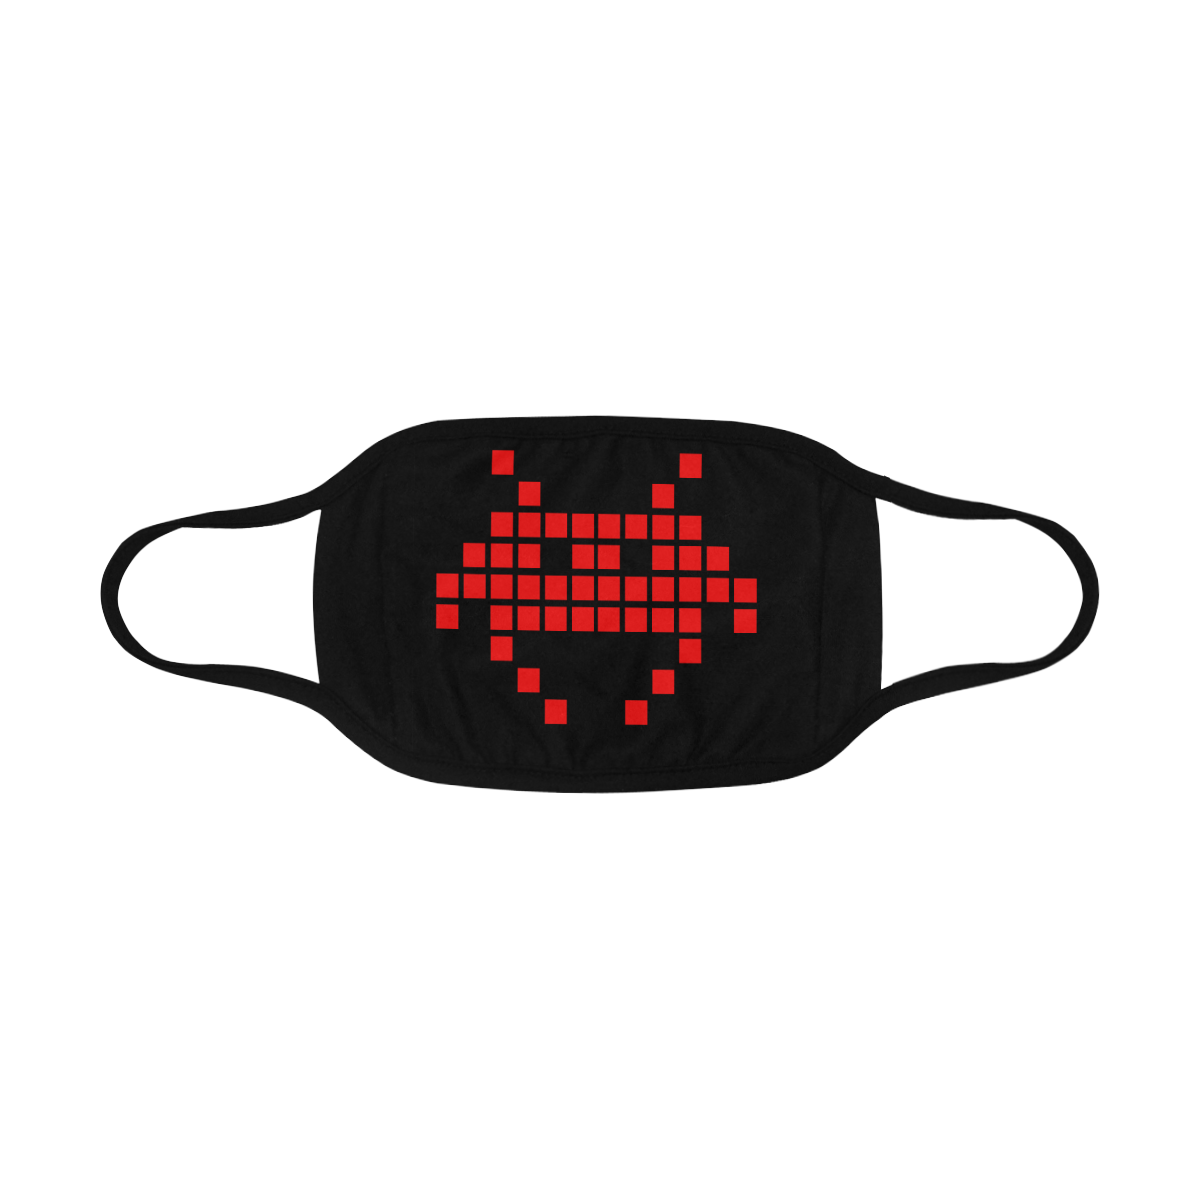 Retro Video Gamers Mouth Mask